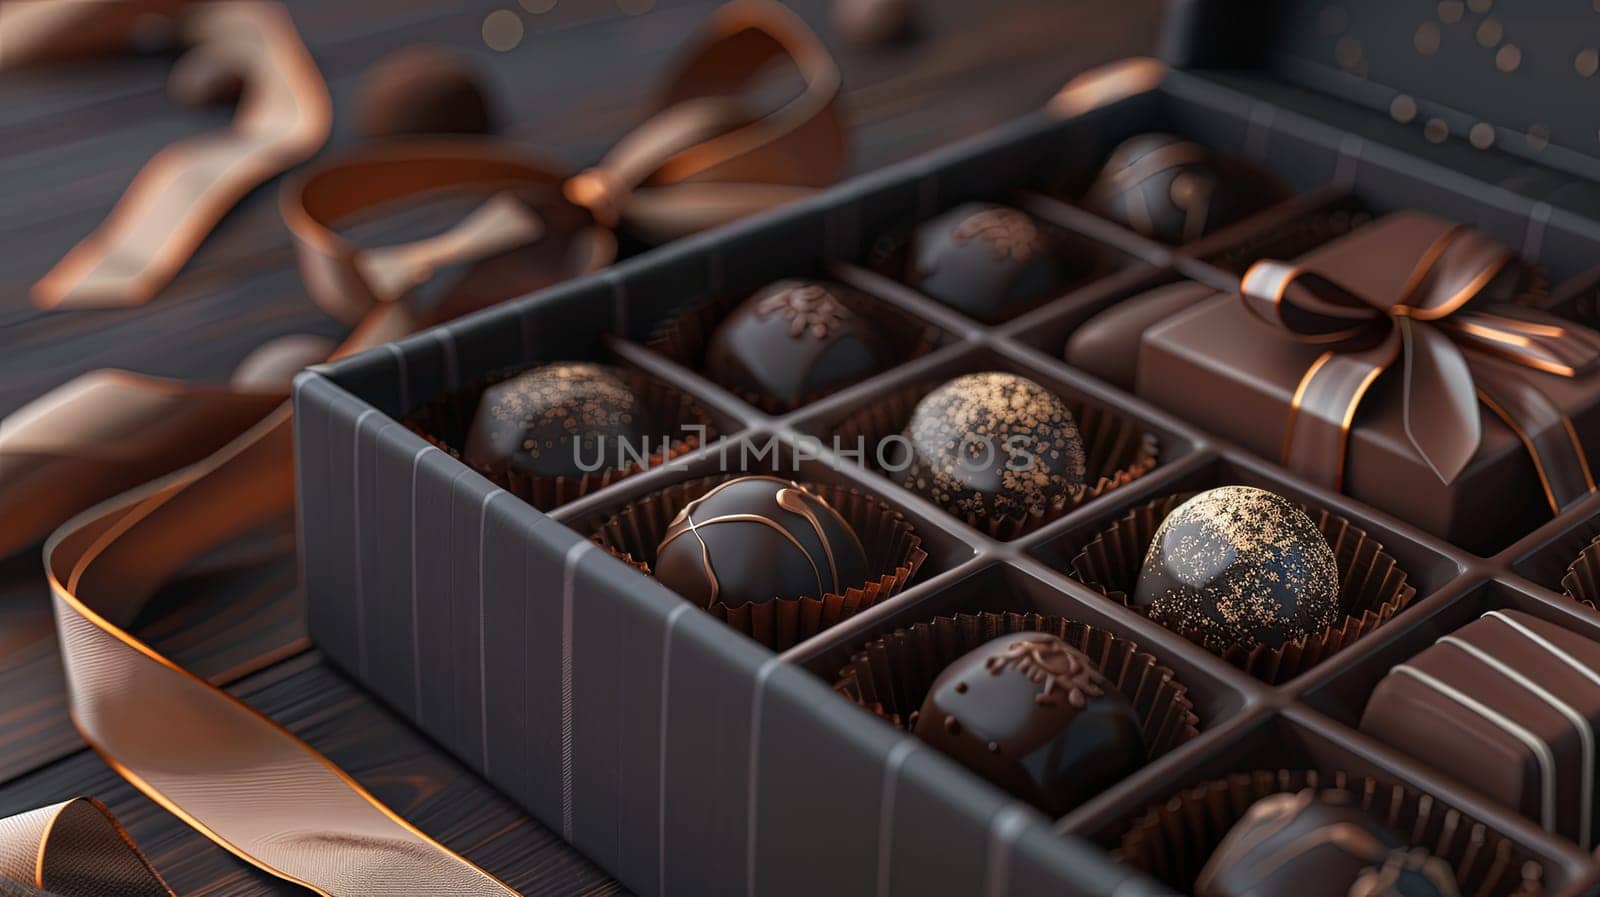 A luxurious box of chocolate truffles adorned with a ribbon, featuring rich dark colors and exquisite detail.